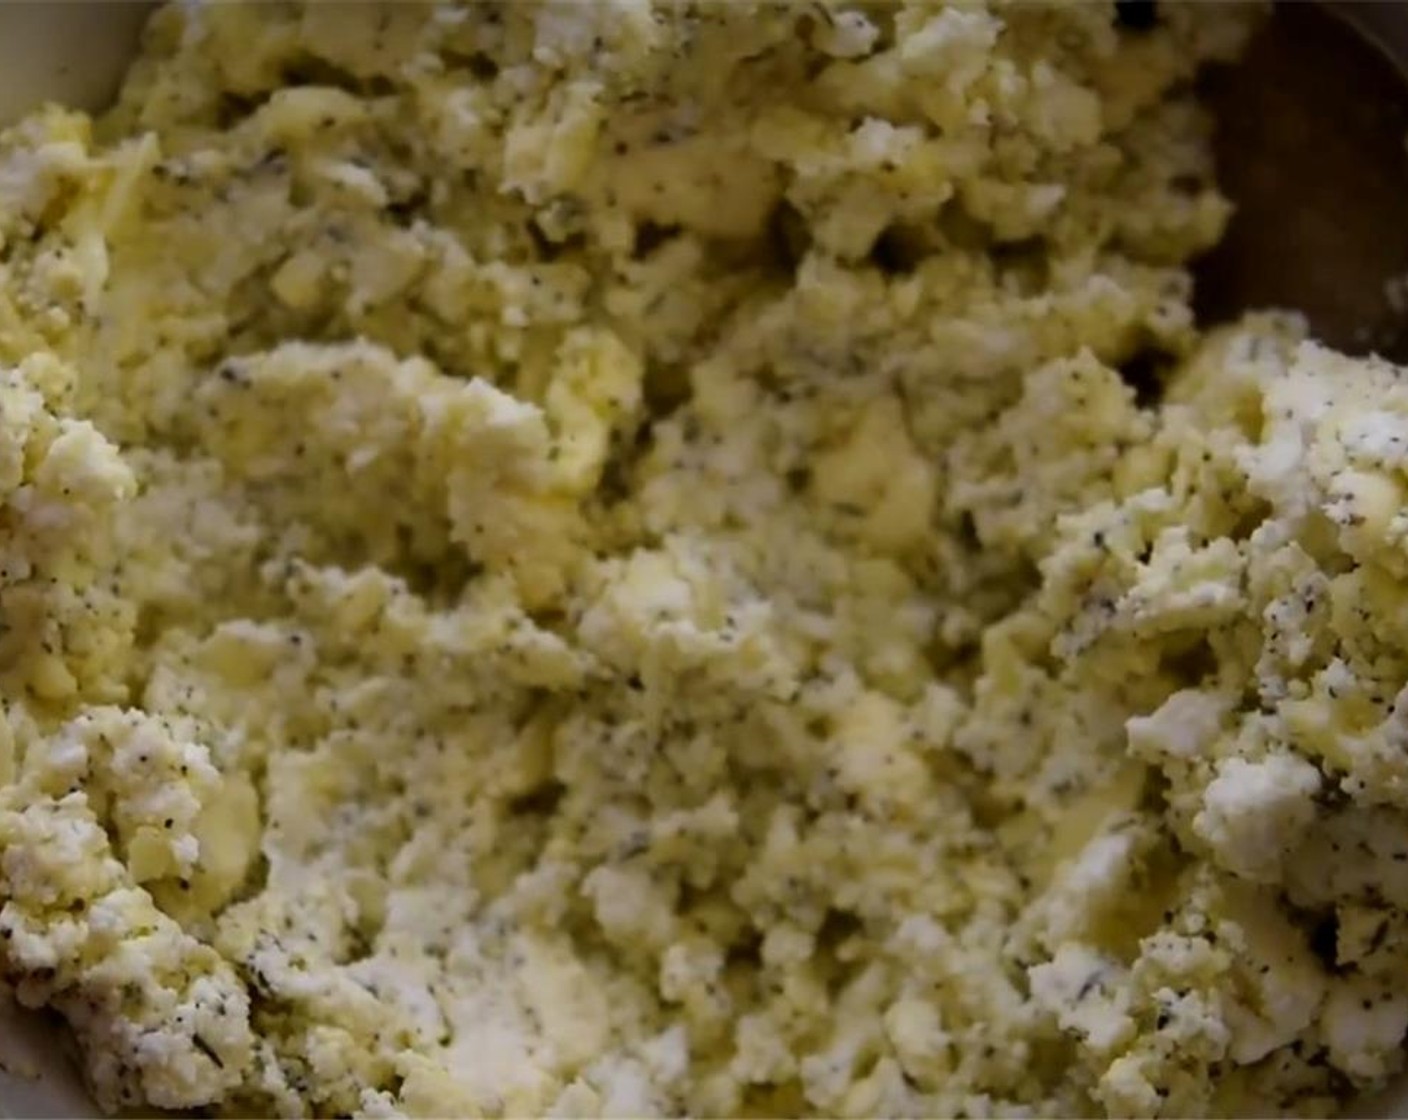 step 2 To make the filling, combine Ricotta Cheese (1 cup), Mozzarella Cheese (1 cup), Feta Cheese (3/4 cup), Egg (1), Dried Oregano (1 tsp), Dried Mint (1 tsp) and Ground Black Pepper (to taste).